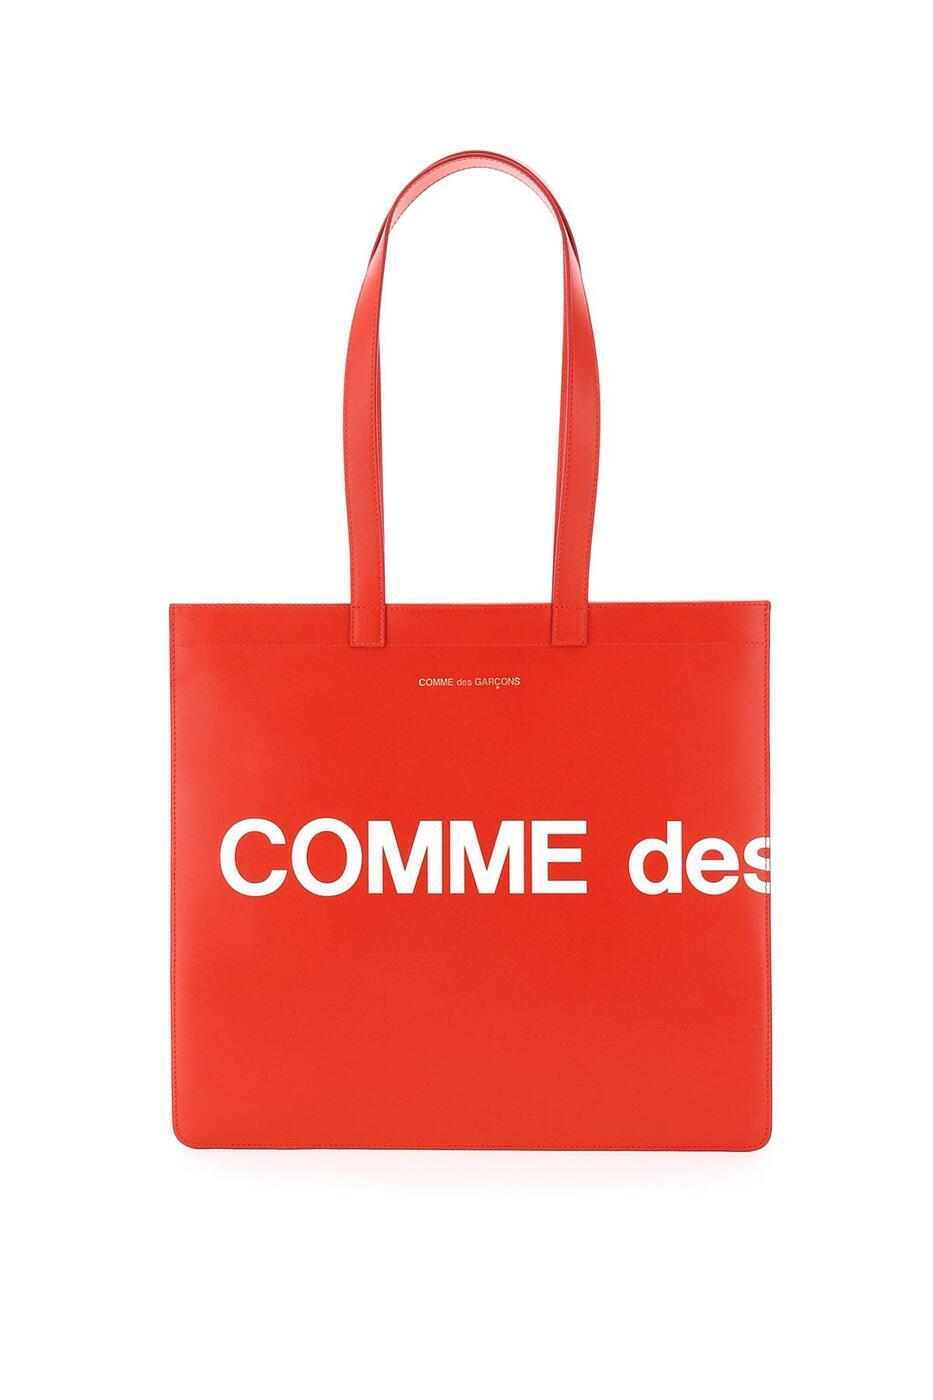 COMME DES GARCONS コム デ ギャルソン レッド Red トートバッグ メンズ 8085550170261 【関税・送料無料】【ラッピング無料】 ba